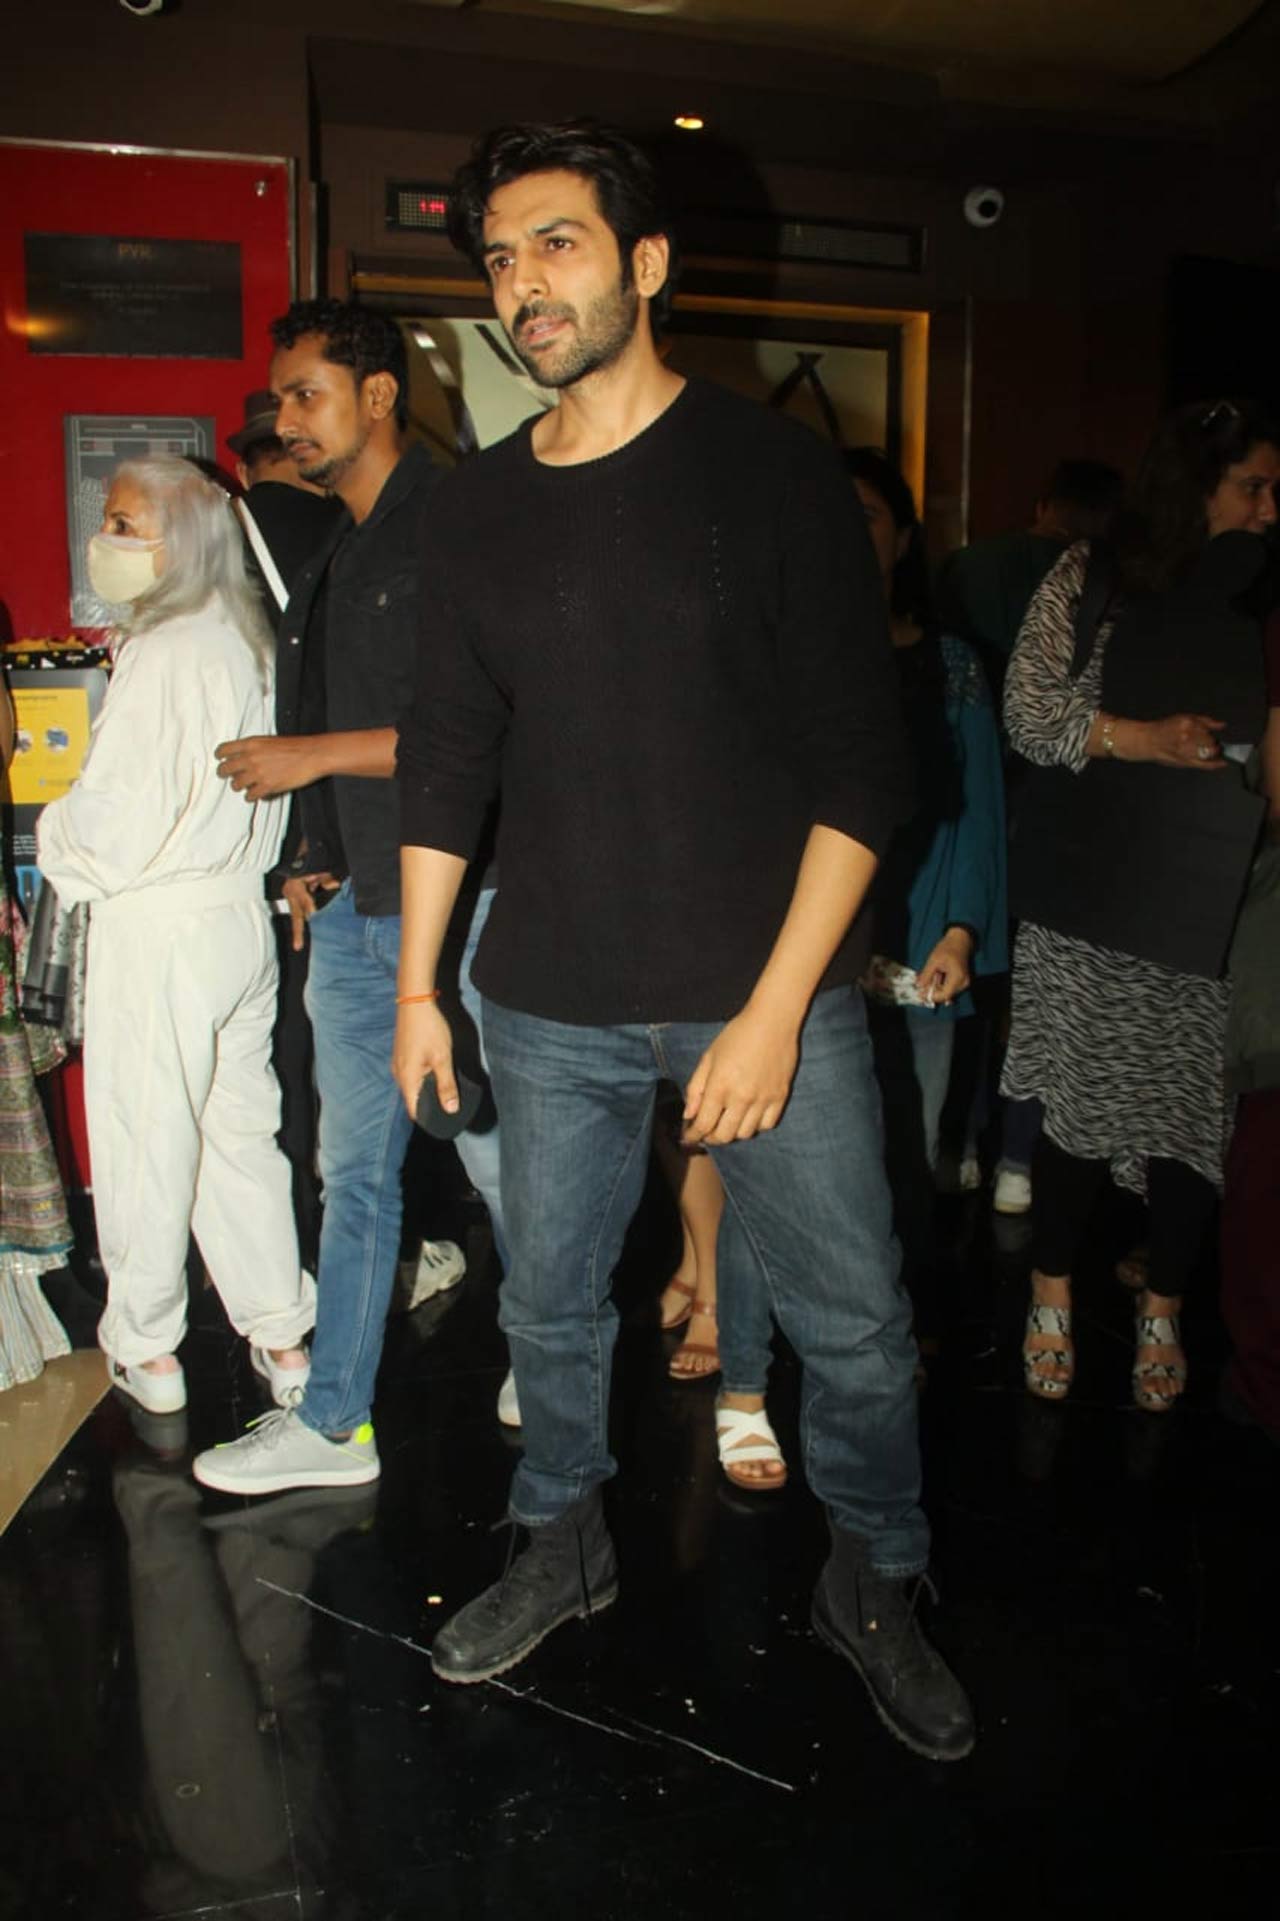 Kartik Aaryan, who will be next seen in 'Dhamaka' and 'Freddy', posed for the paparazzi as he attended the Sooryavanshi screening in Mumbai. The actor was seen wearing a black basic tee, paired with a blue pair of denim.